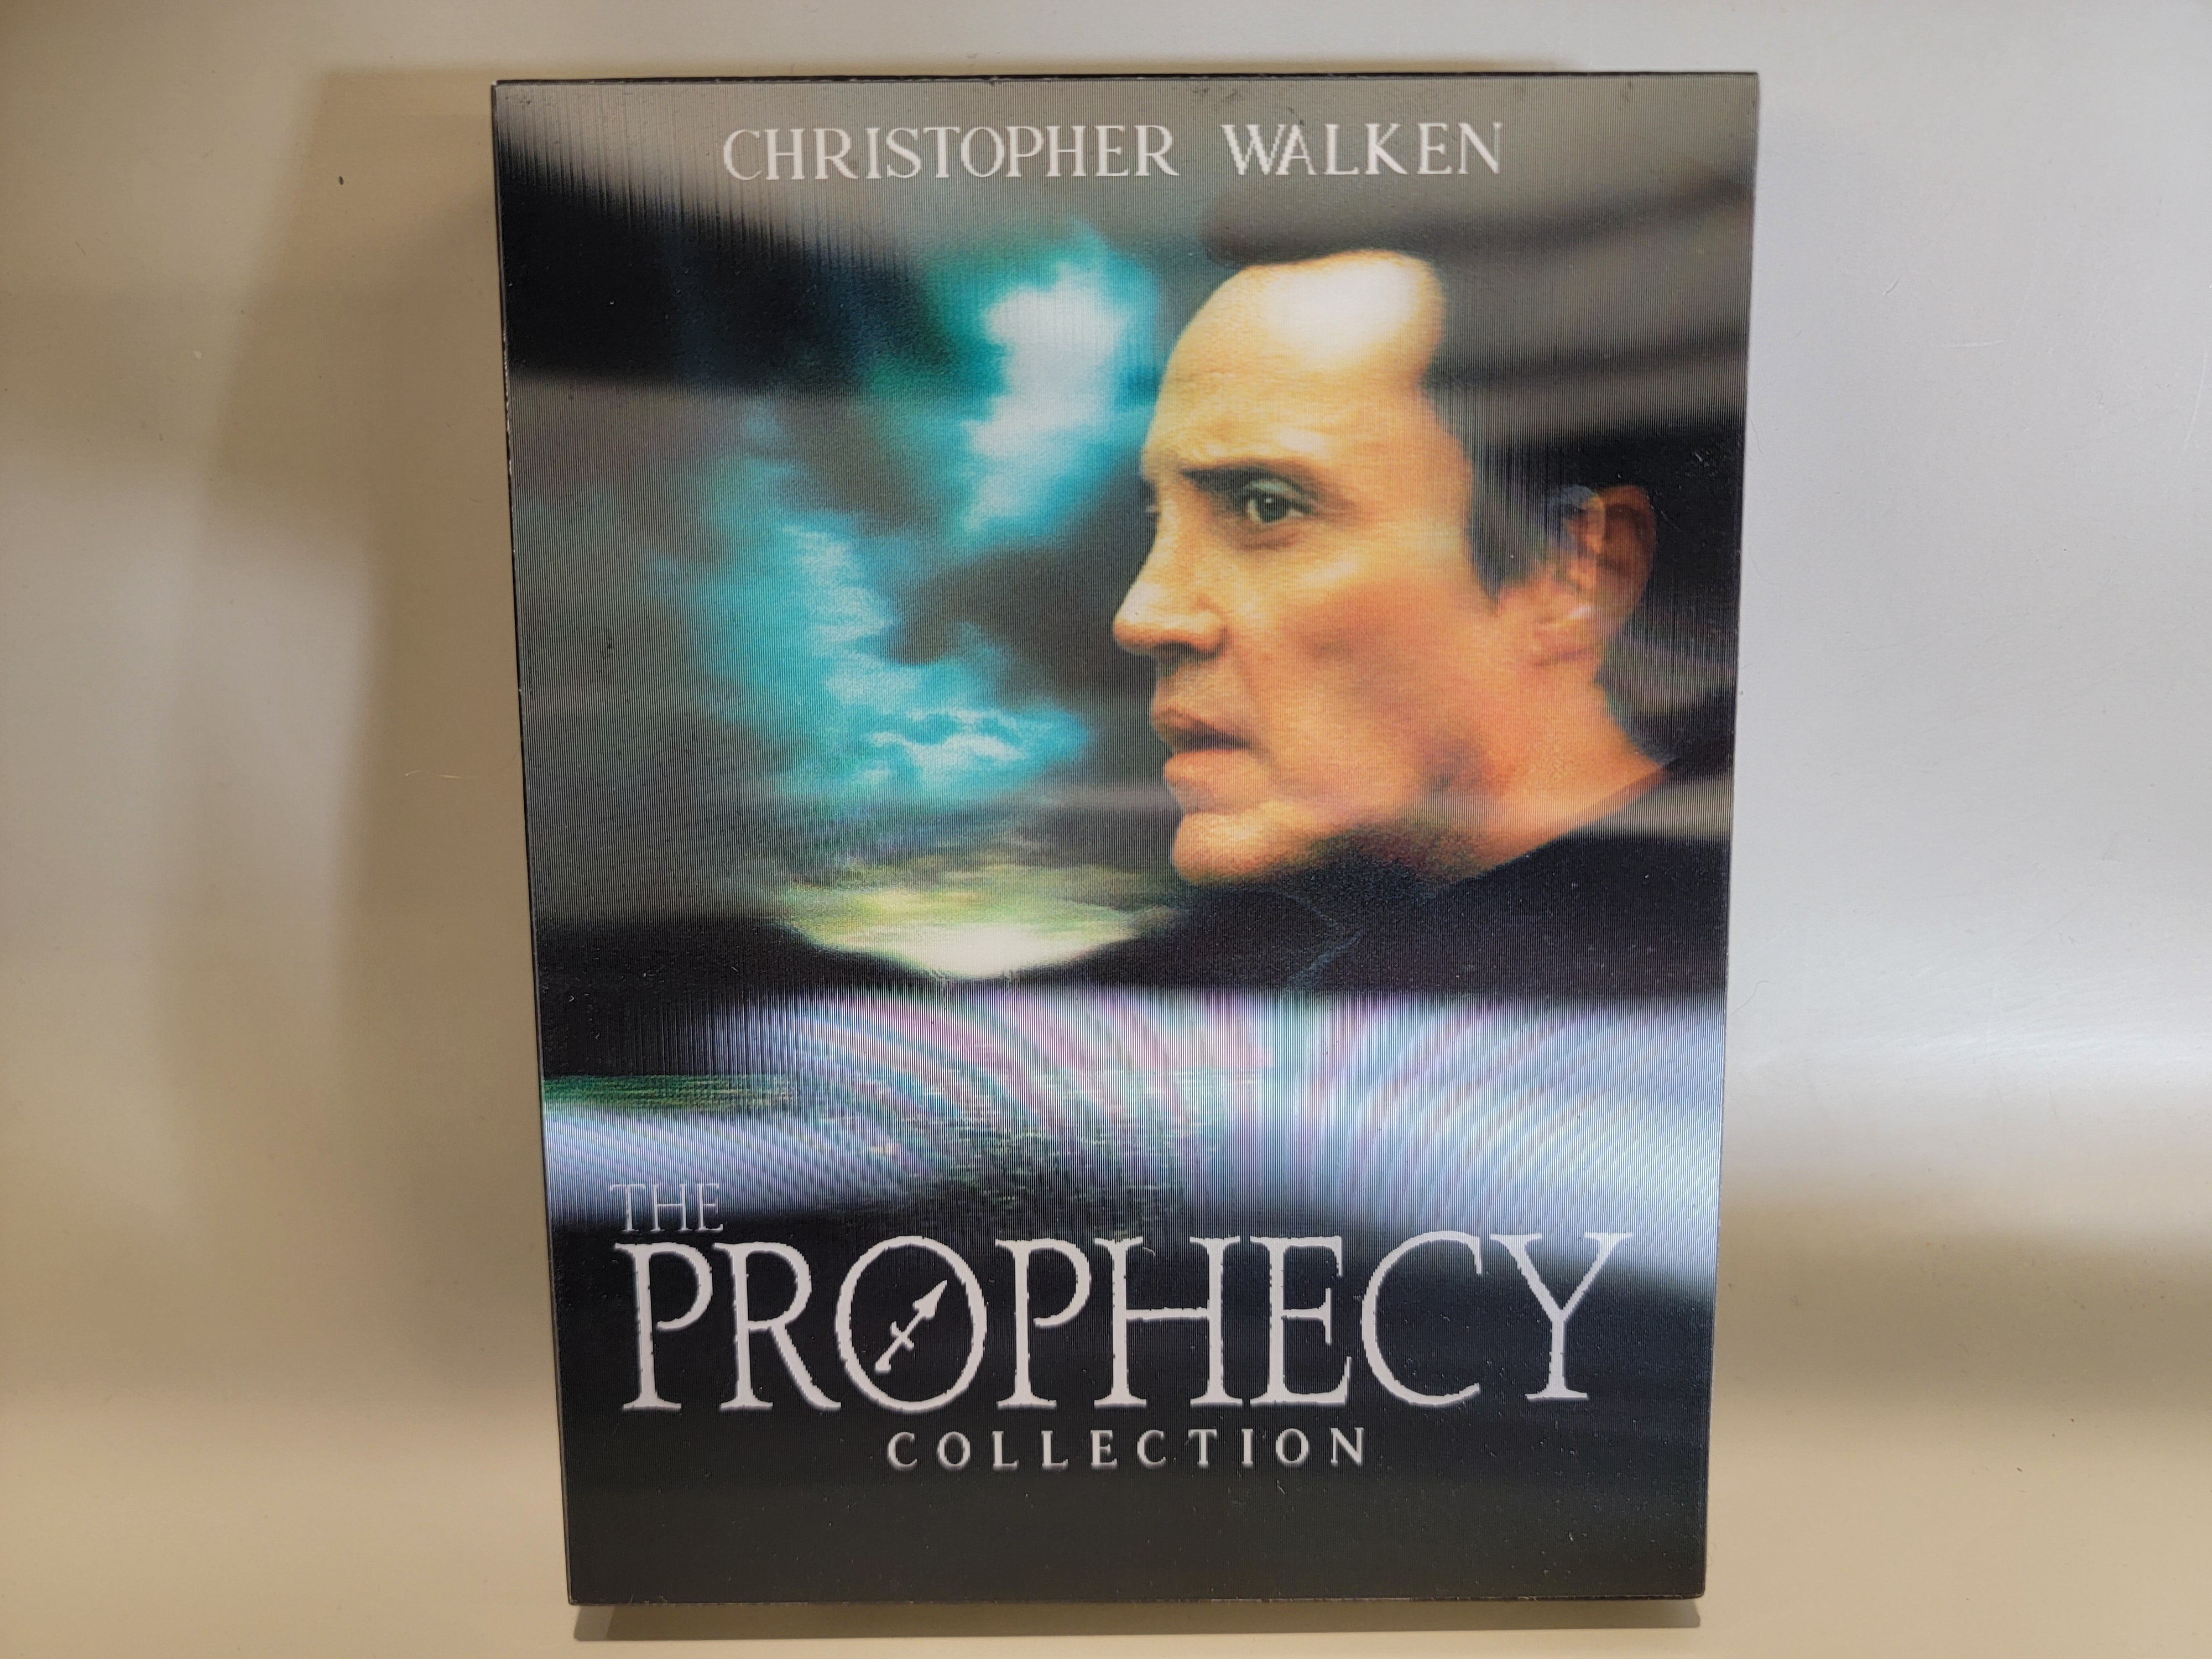 THE PROPHECY COLLECTION (LIMITED EDITION) BLU-RAY [USED]